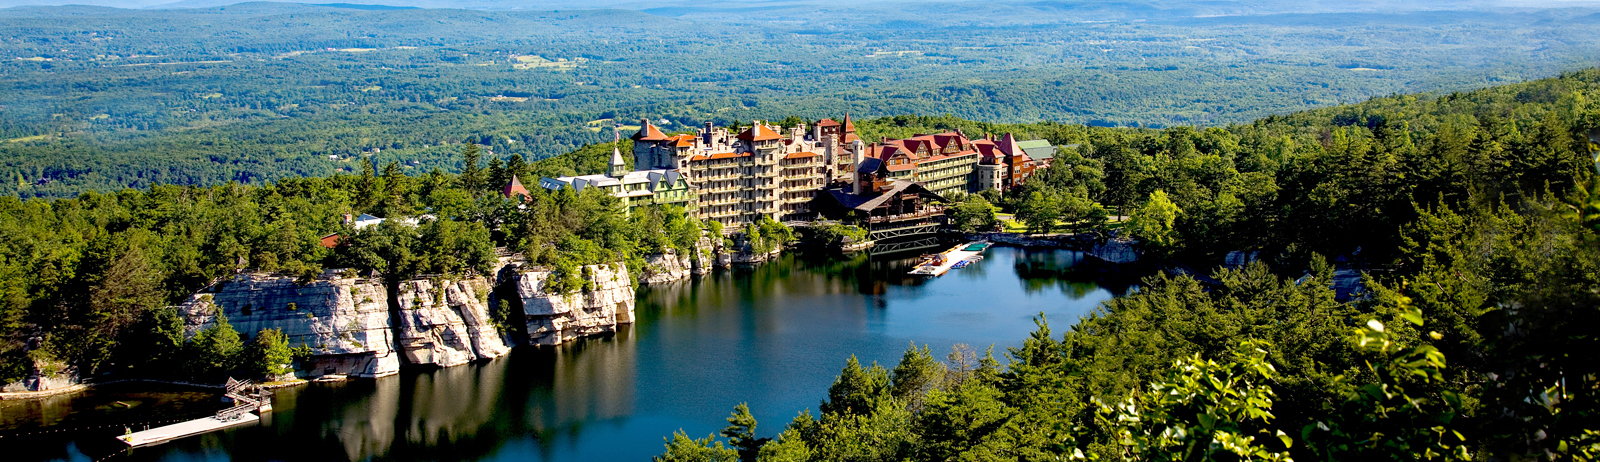 Mohonk Mountain House in Spring